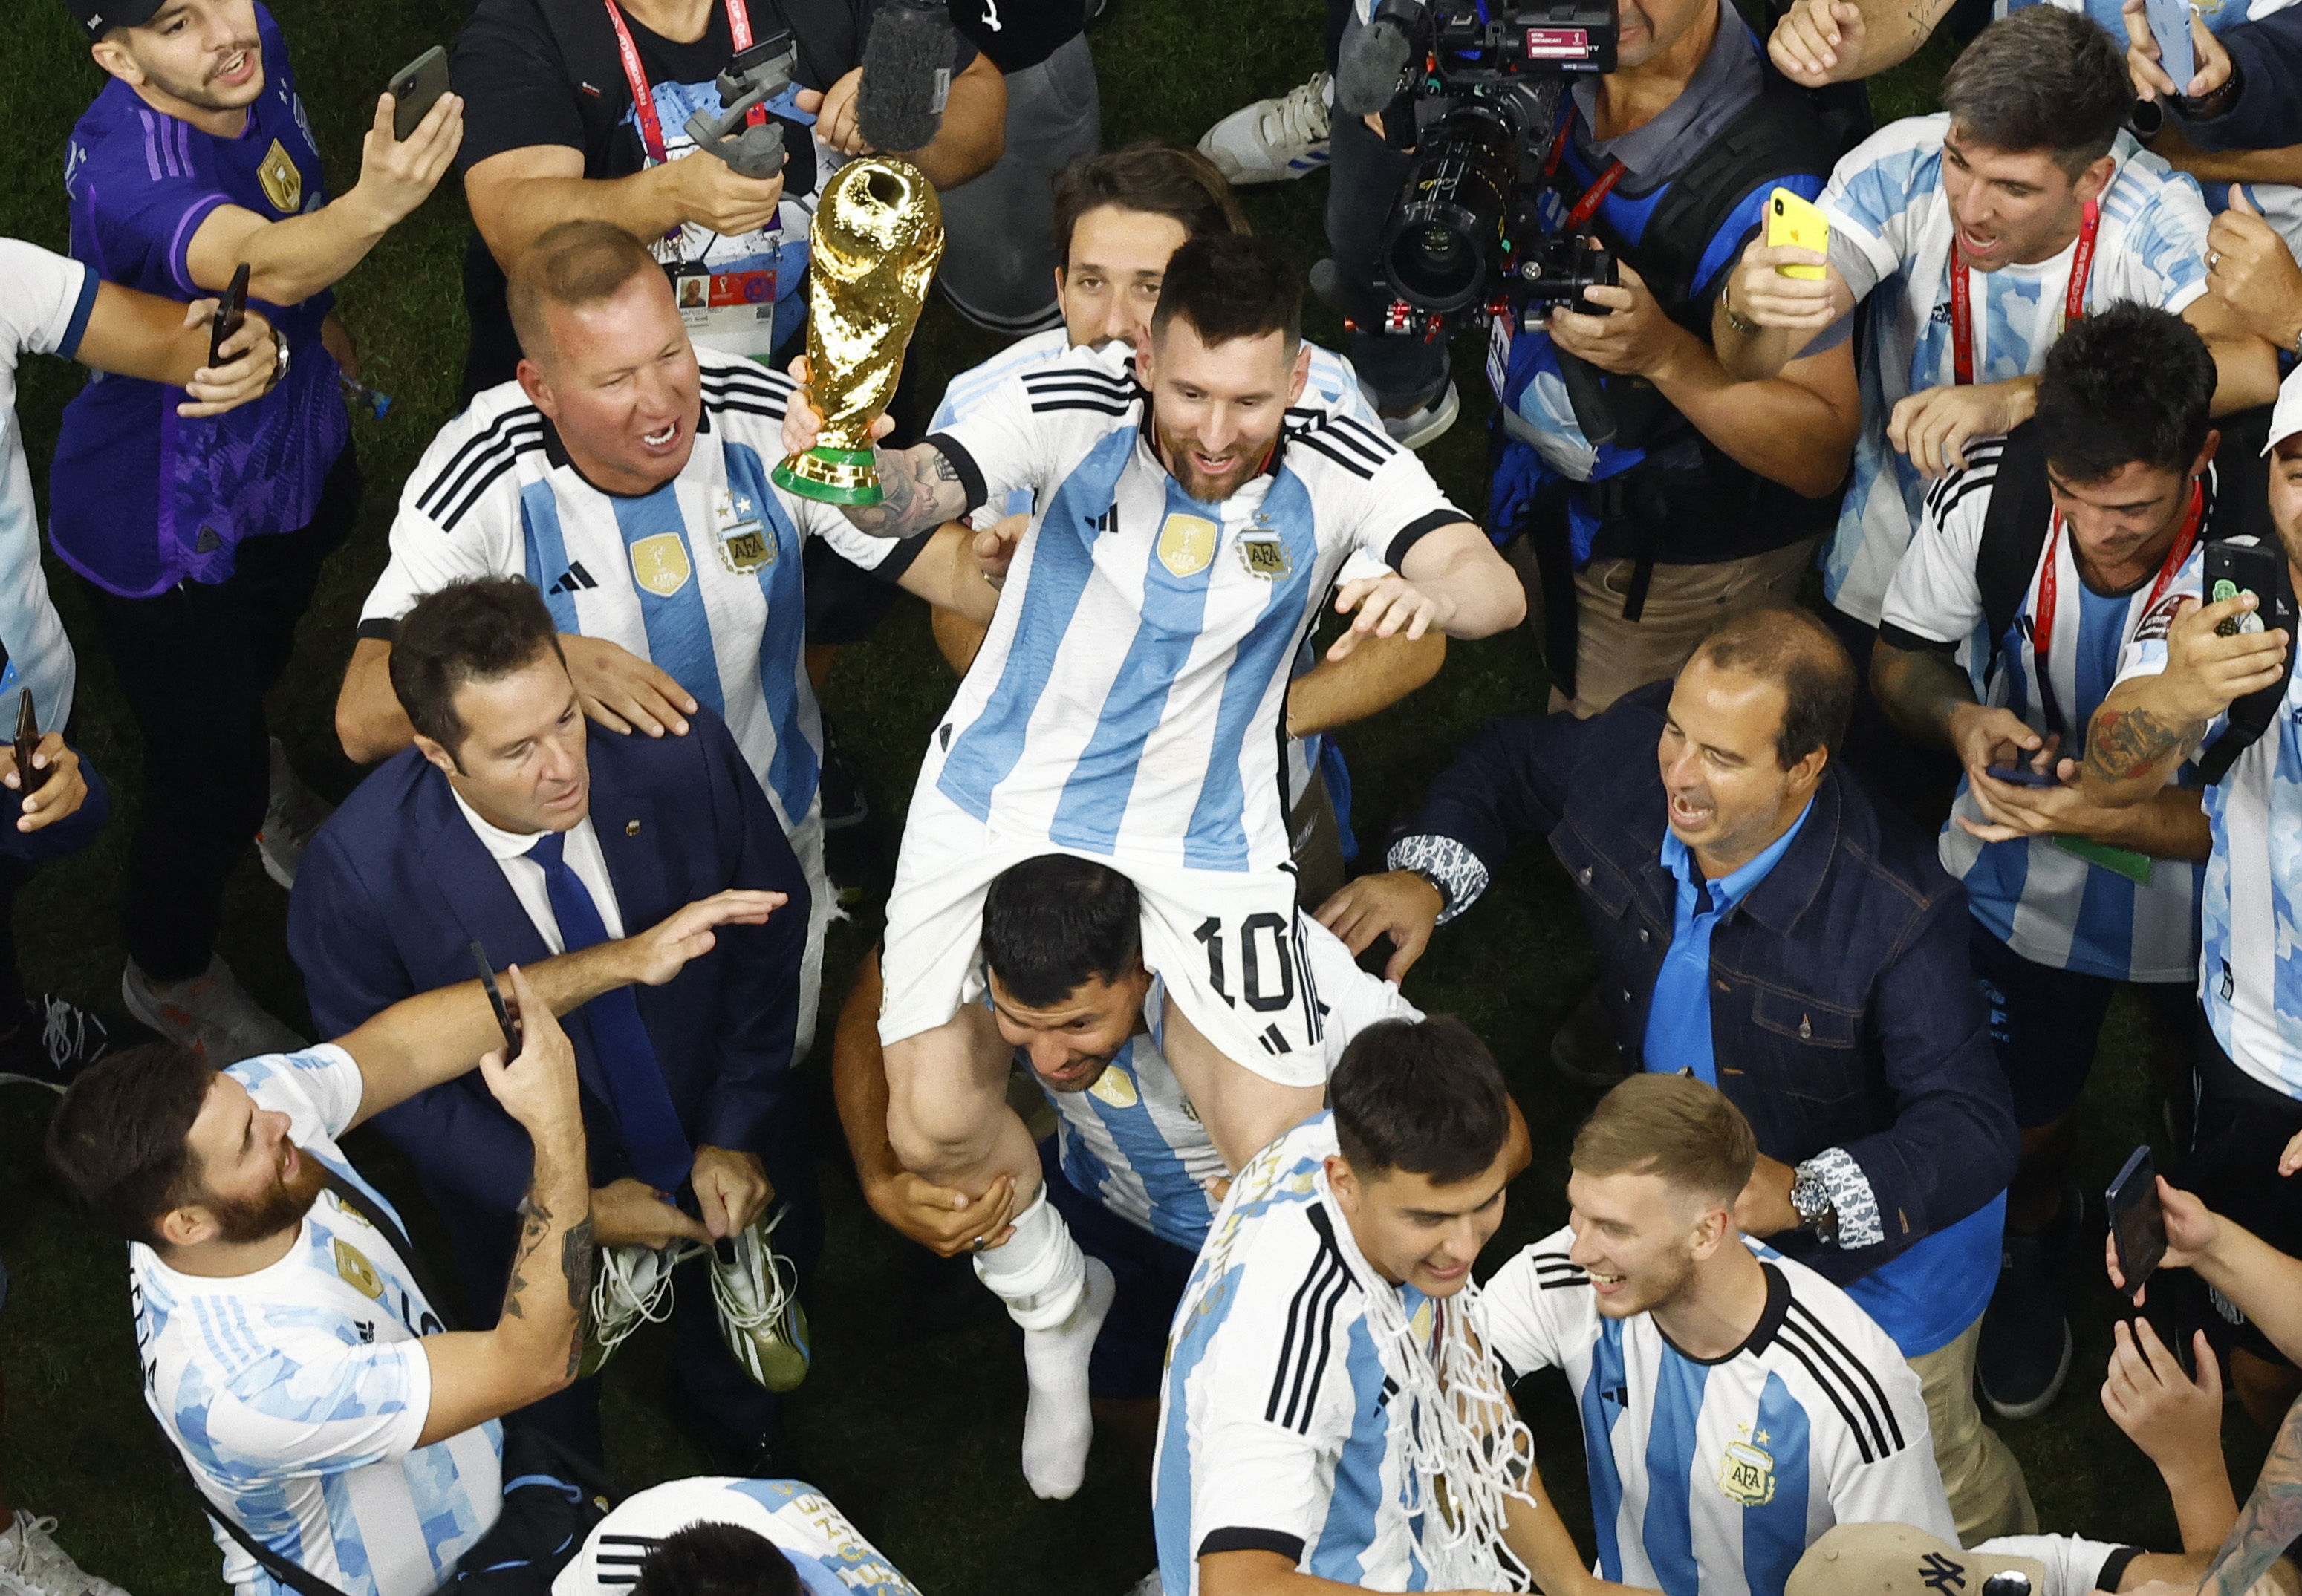 Soccer Football - FIFA World Cup Qatar 2022 - Final - Argentina v France - Lusail Stadium, Lusail, Qatar - December 18, 2022 General view as Argentina's Lionel Messi on the shoulders of Sergio Aguero celebrates with the trophy alongside fans after winning the World Cup REUTERS/Peter Cziborra